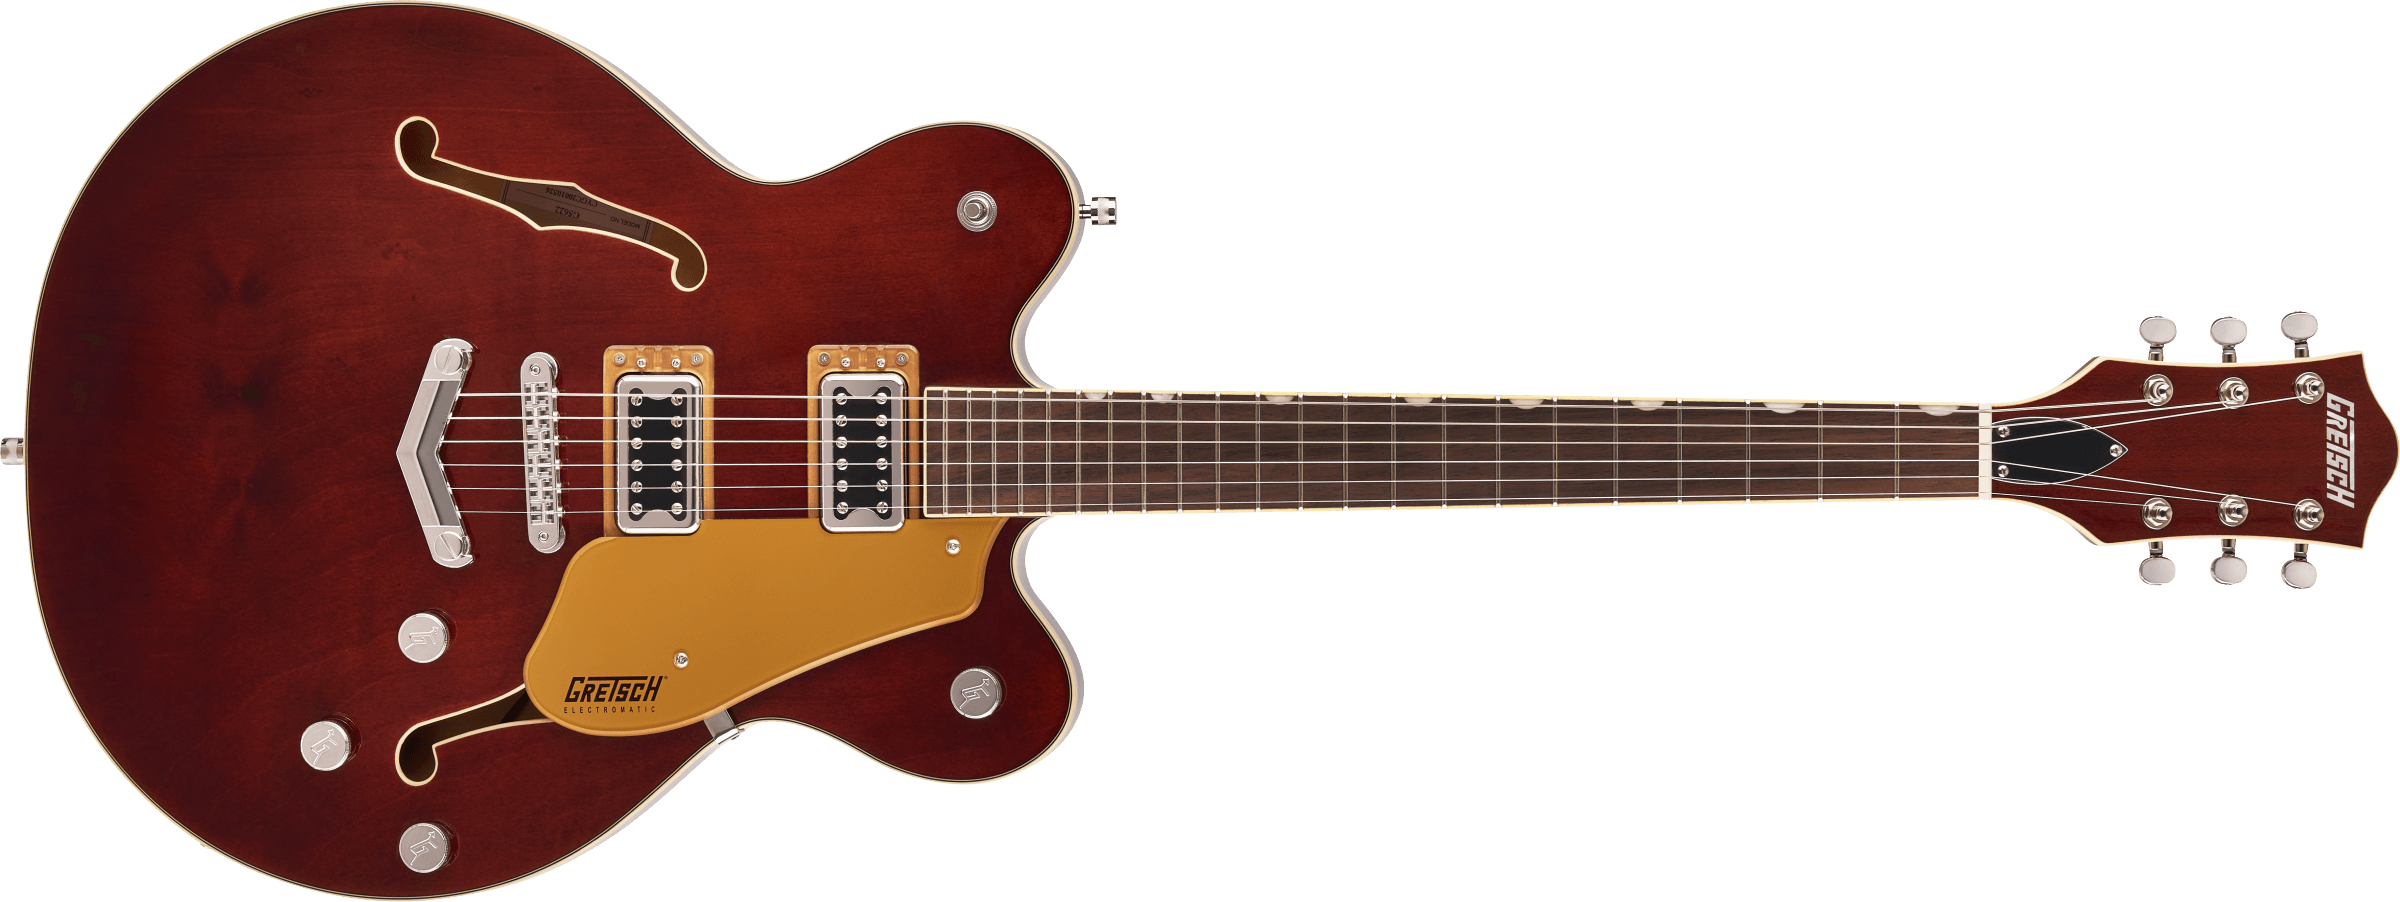 Gretsch G5622 Electromatic® Center Block Double-Cut with V-Stoptail, Laurel Fingerboard, Aged Walnut 2508300592